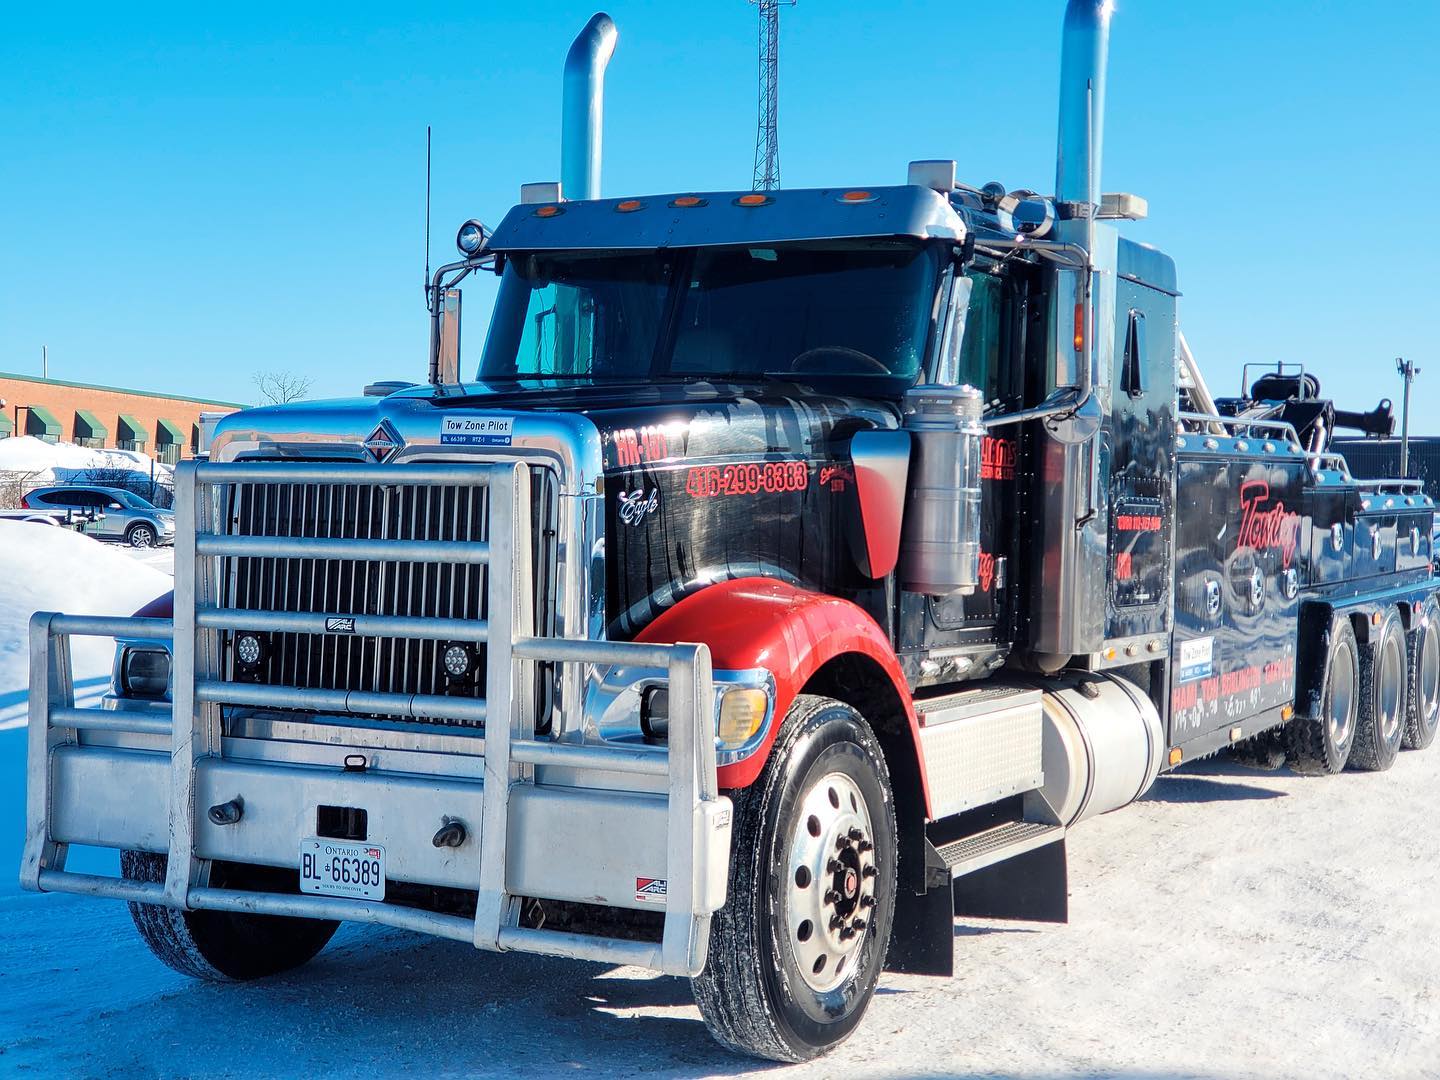 Williams Towing - Heavy Equipment Transport Services | Williams Towing 